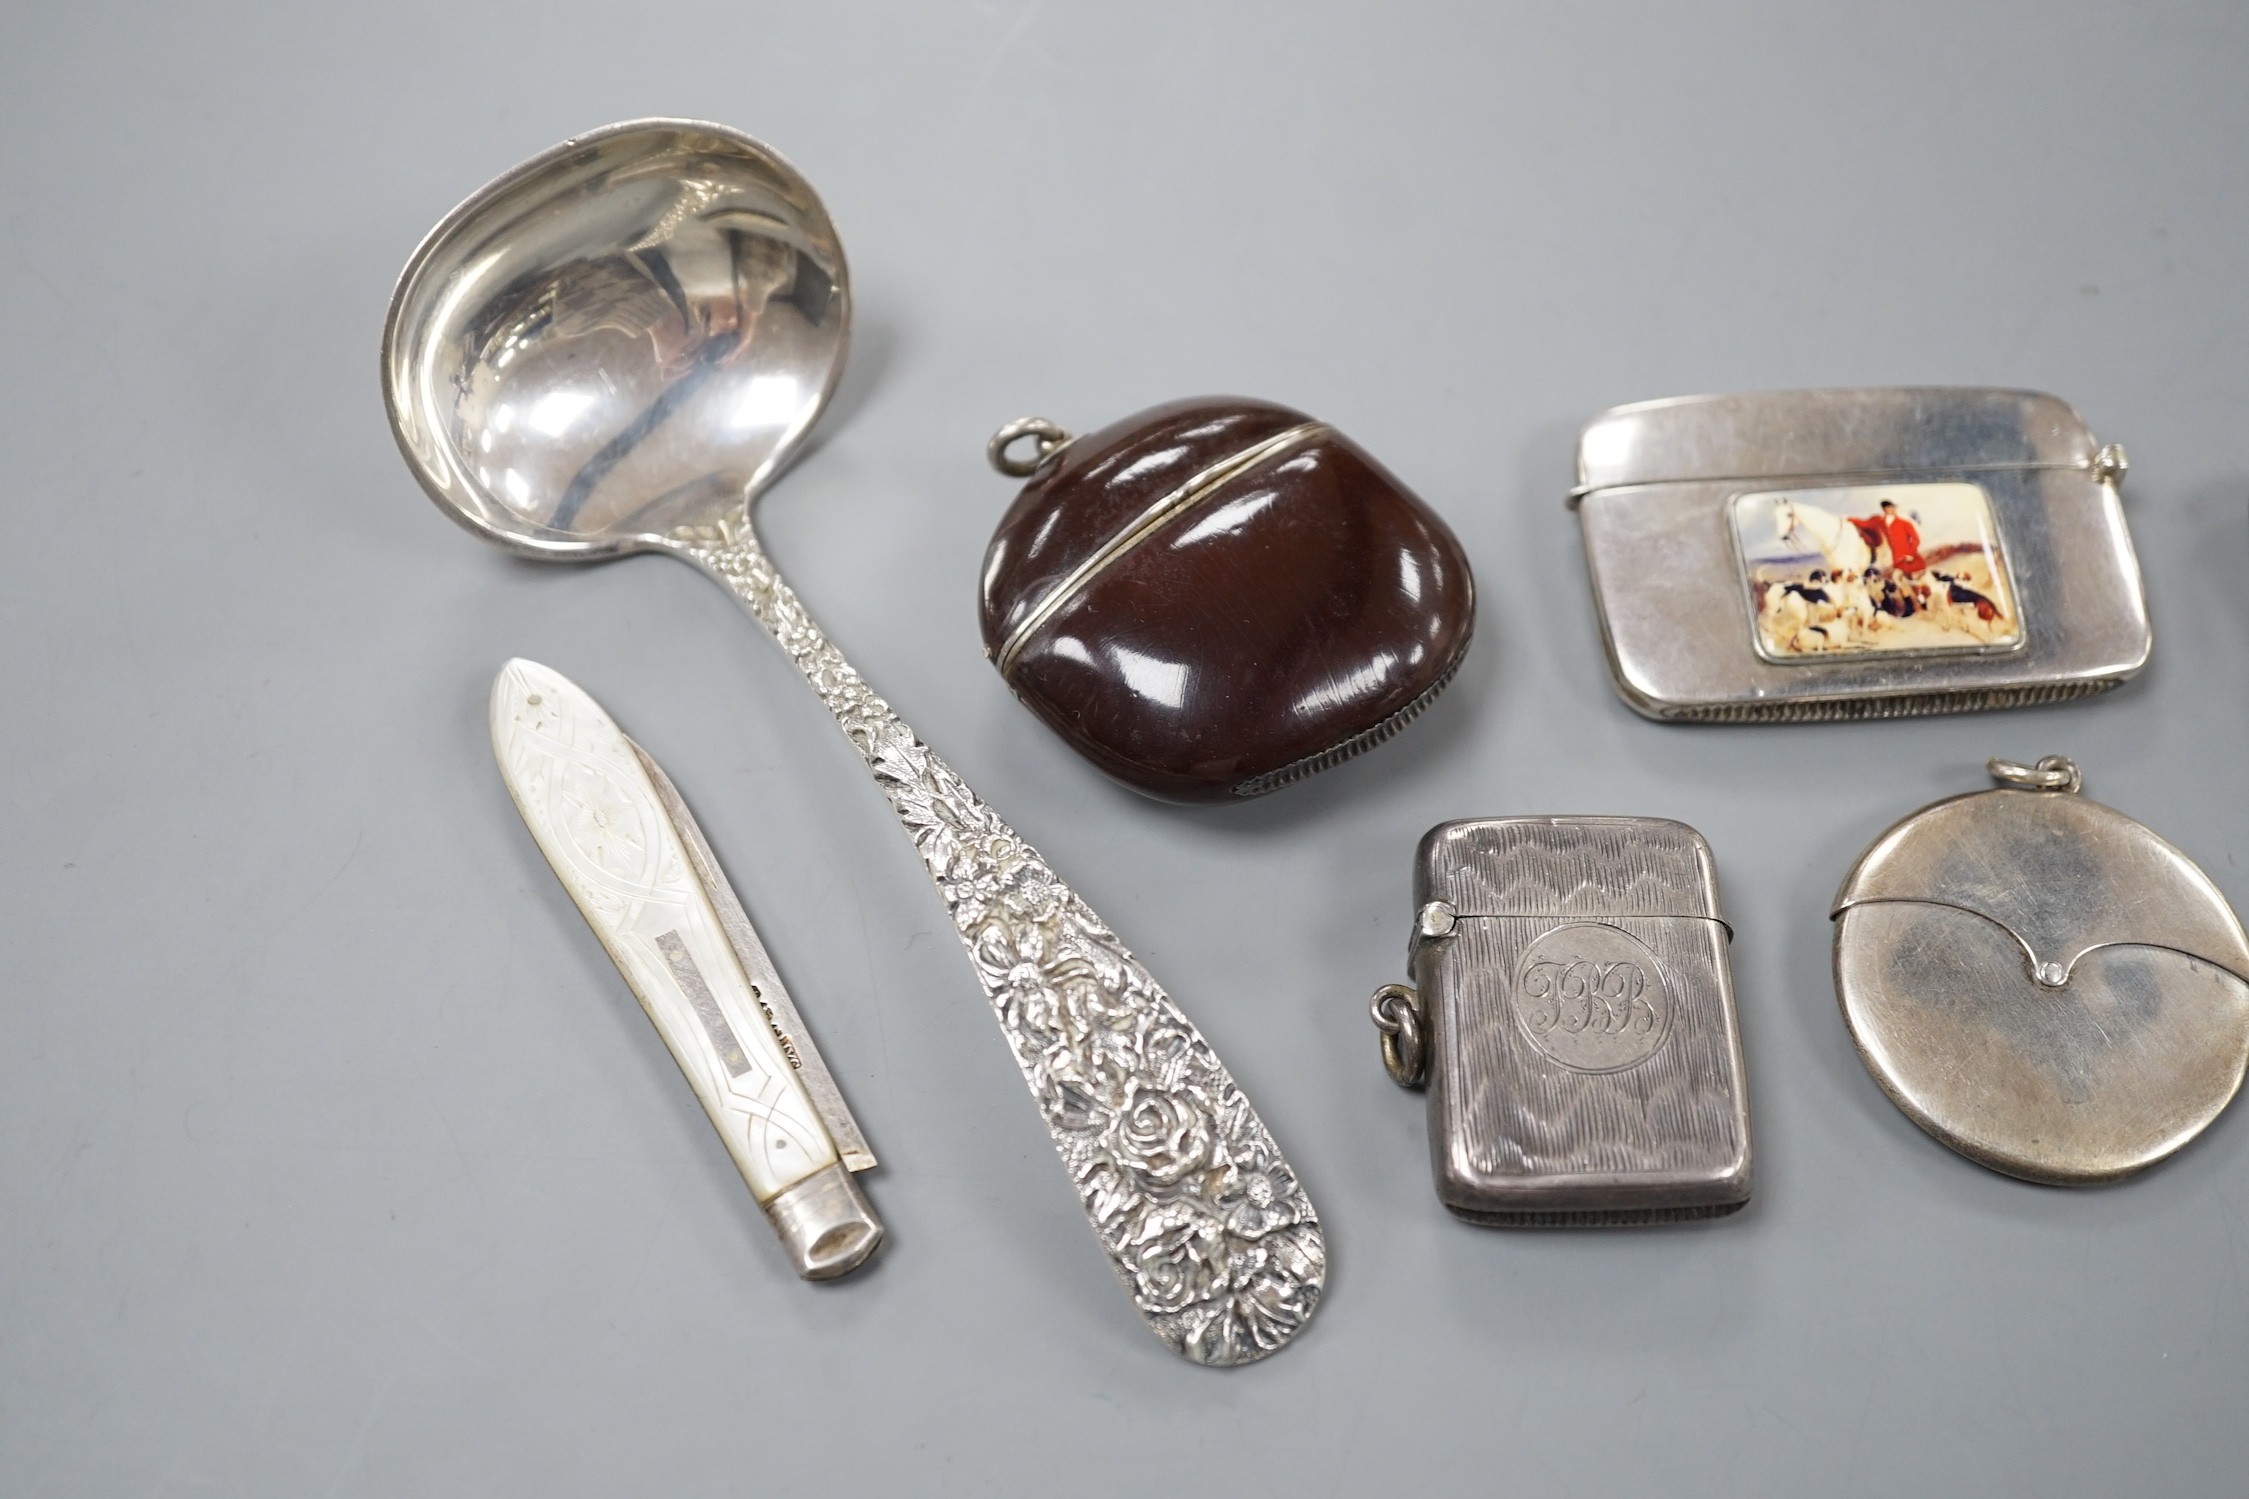 Four assorted early 20th century silver vesta cases, including a silver gilt mounted nut, and patent action circular, together with a sterling vesta case and ornate handled sauce ladle and a mother of pearl handed silver